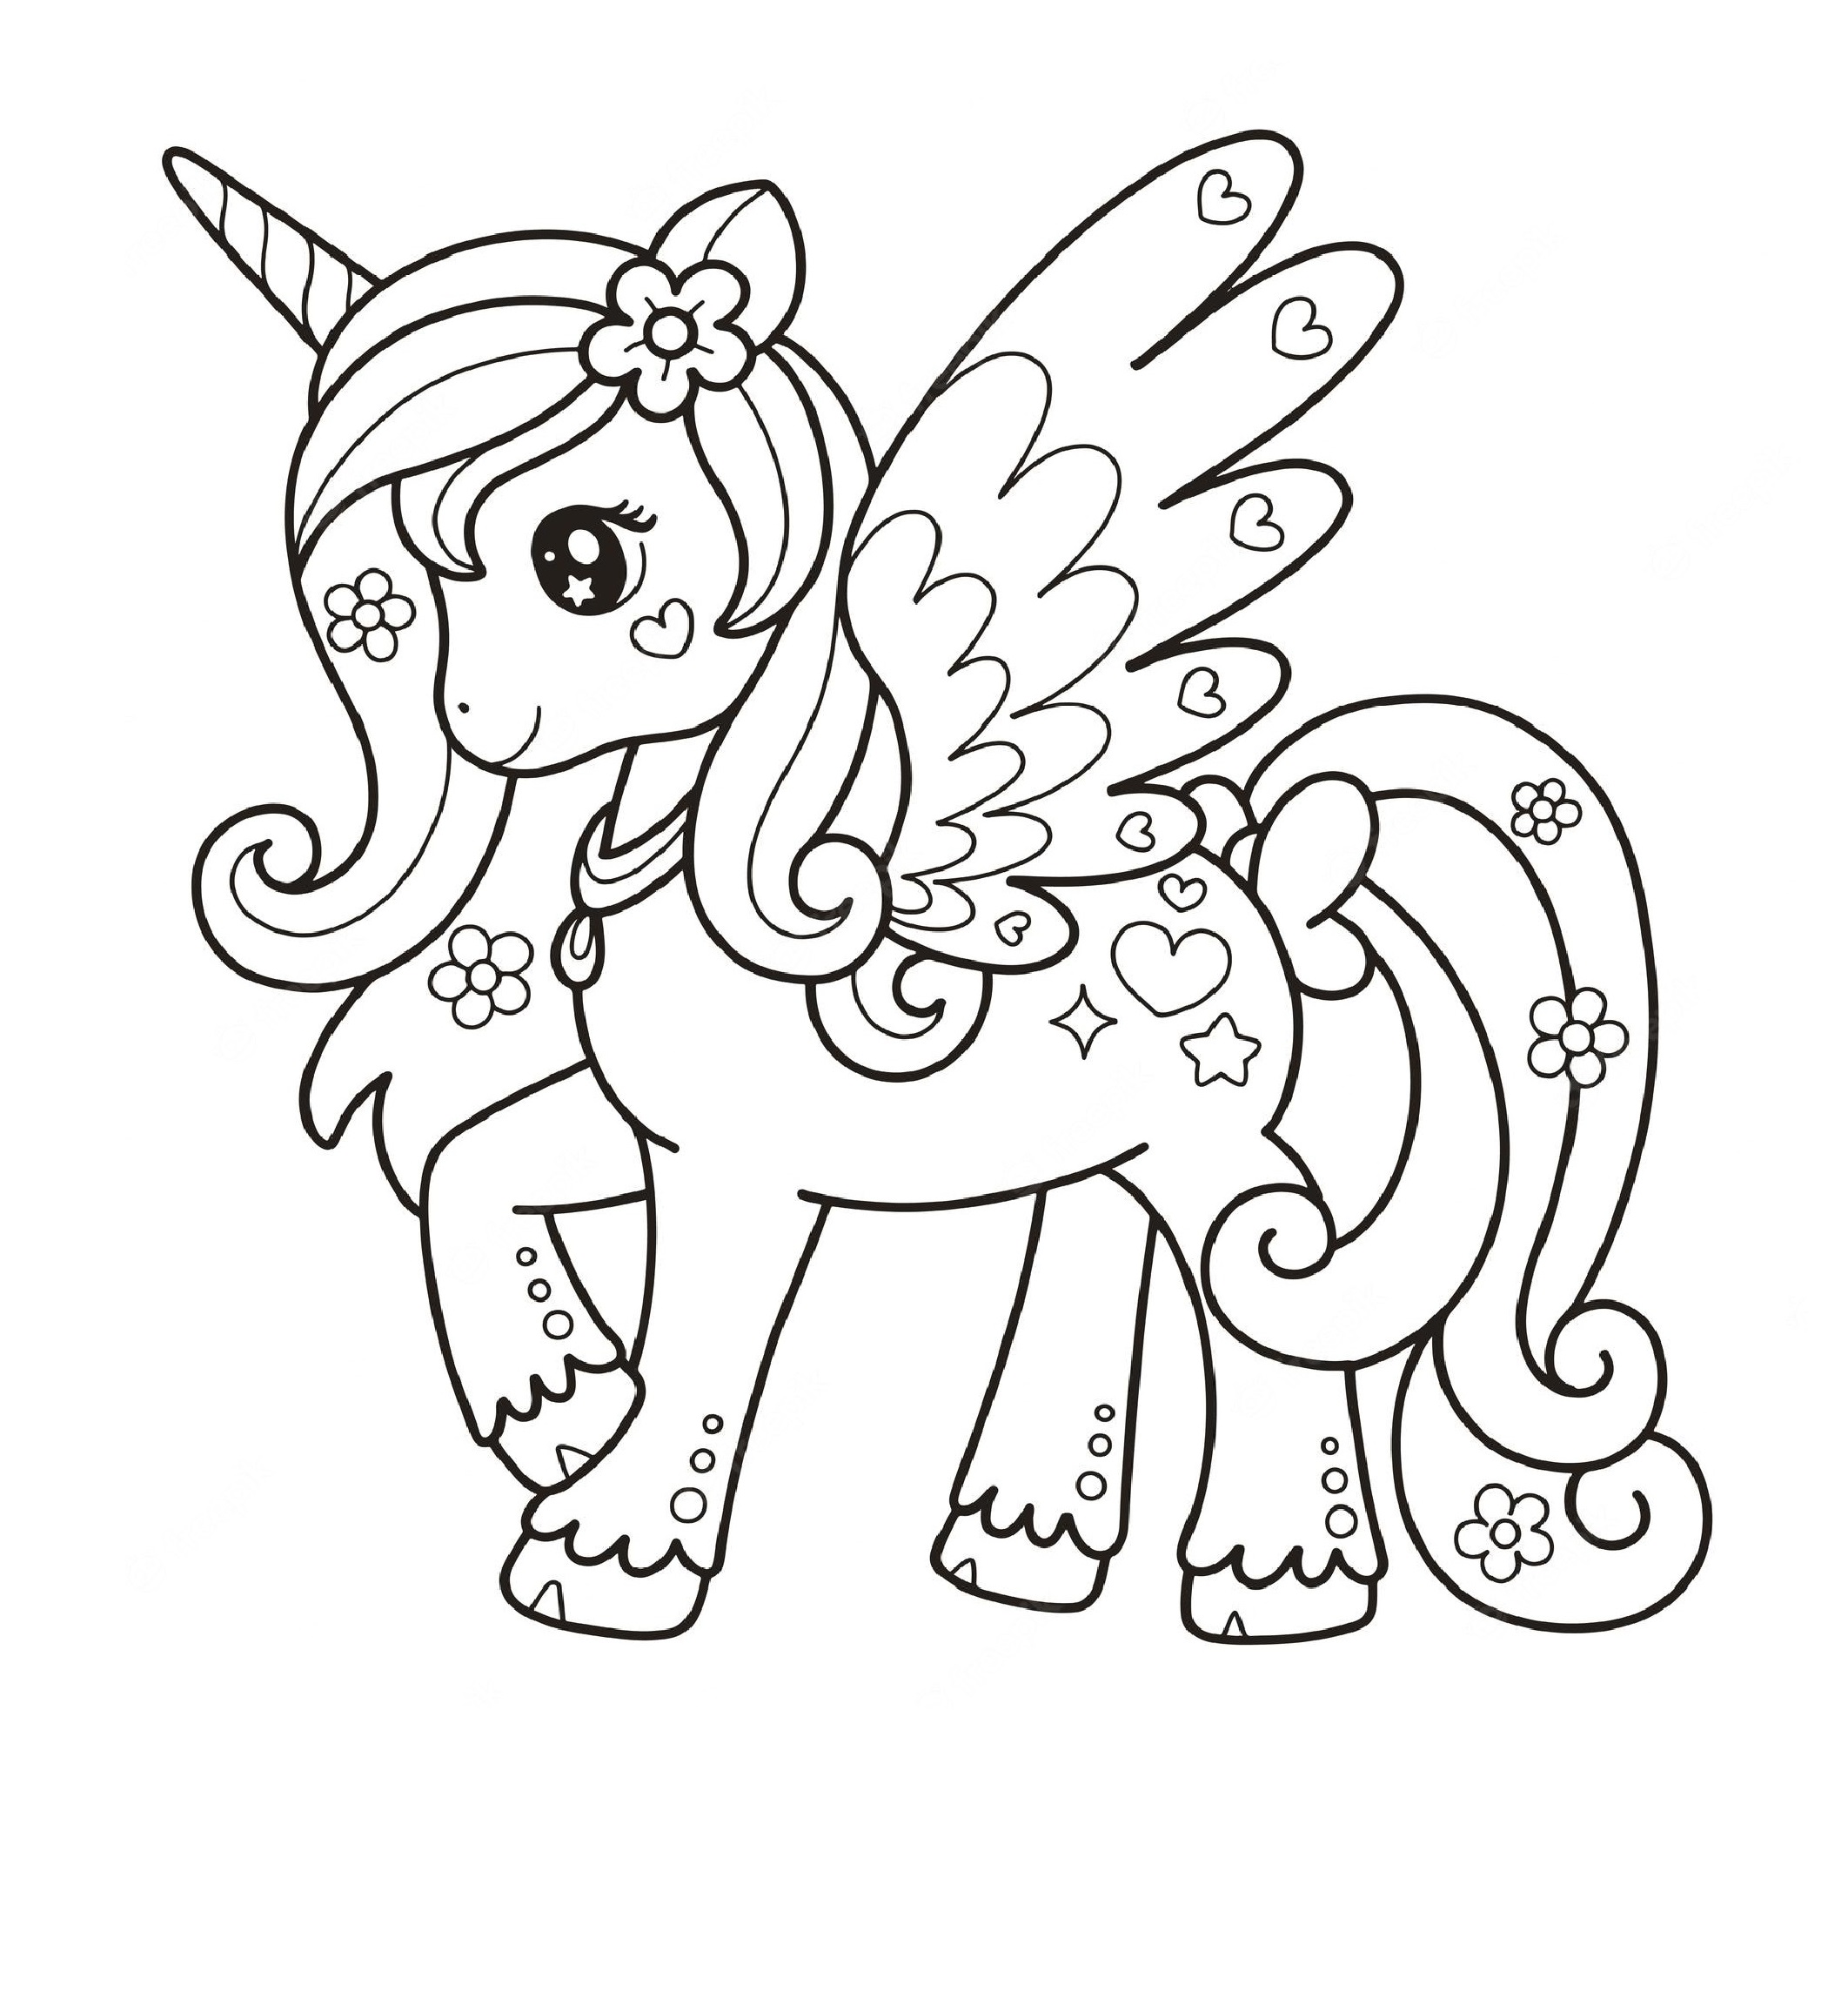 Lovely Unicorn Coloring Page Printable for Kids, Free, Simple and Easy, as PDF